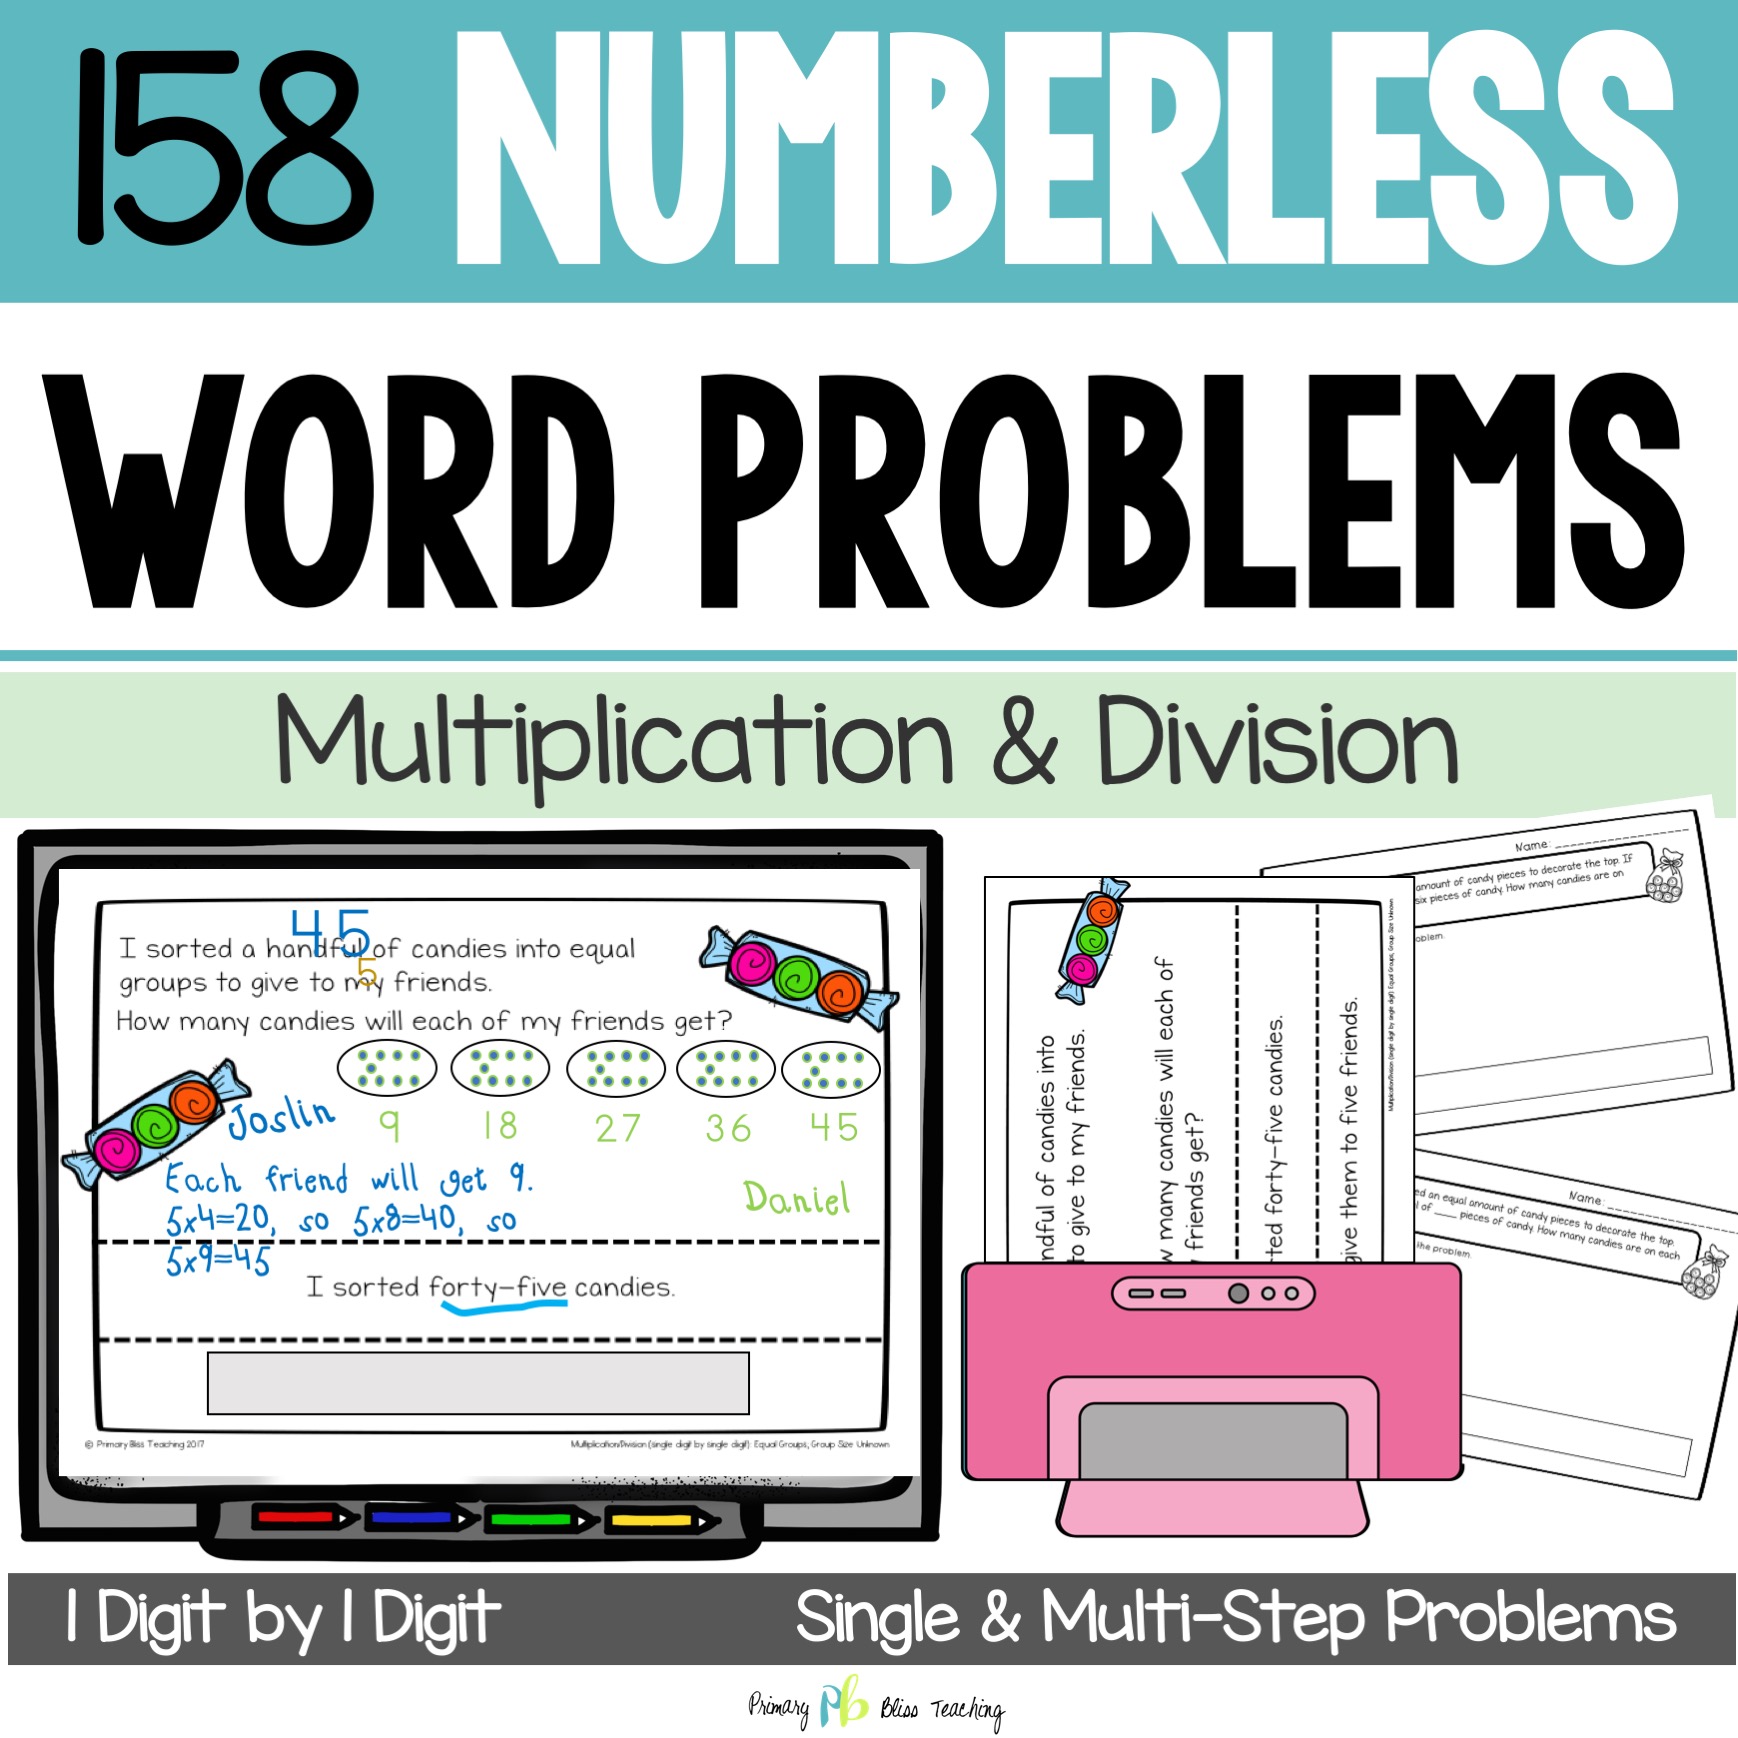 multiplication-and-division-word-problems-multiplication-and-division-word-problems-grade-4